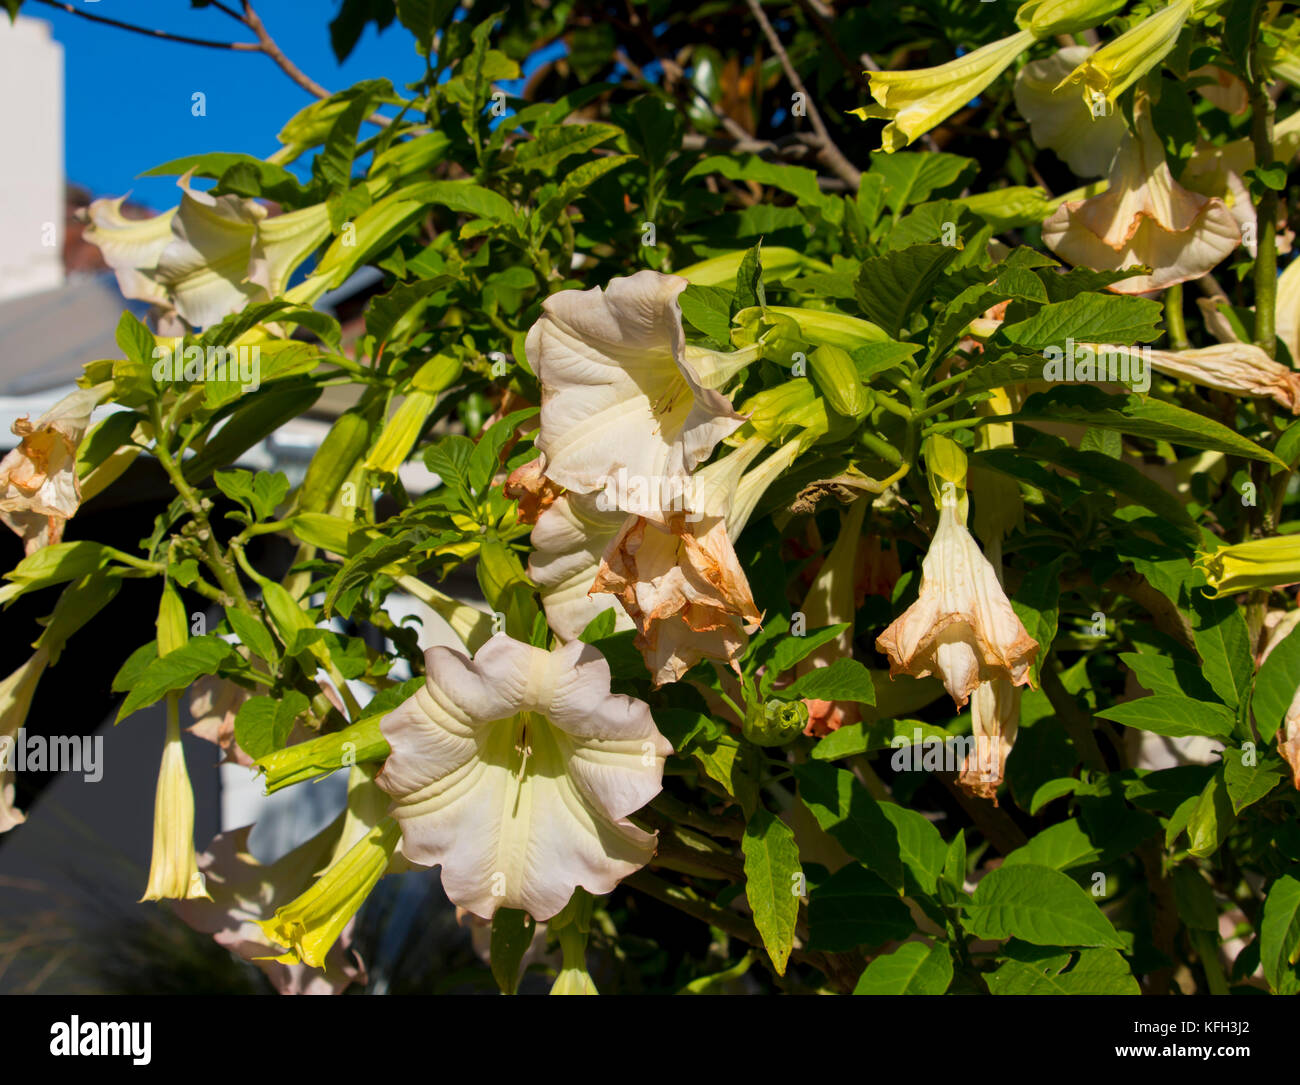 Large pure white trumpet flowers of Datura a genus of nine species of poisonous vespertine flowering plants in family Solanaceae,  Angel's Trumpet. Stock Photo